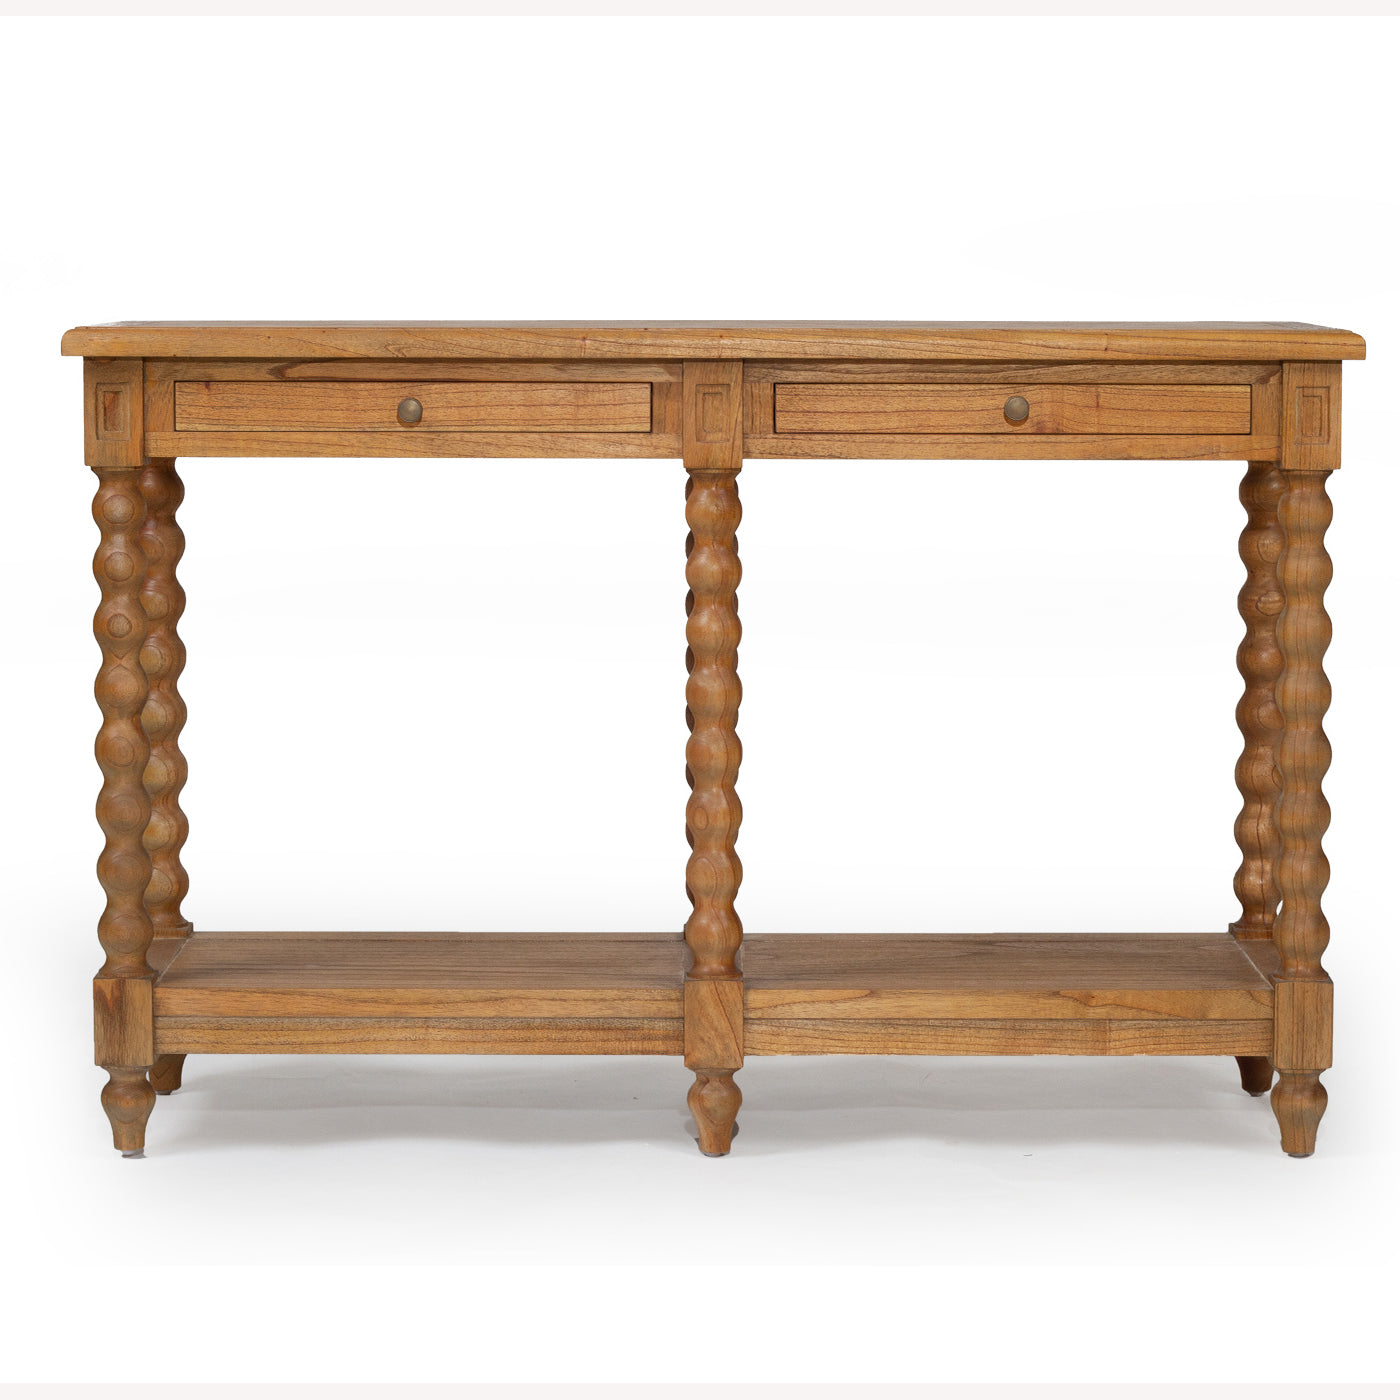 Keni Console Table with 2 Drawer - Notbrand